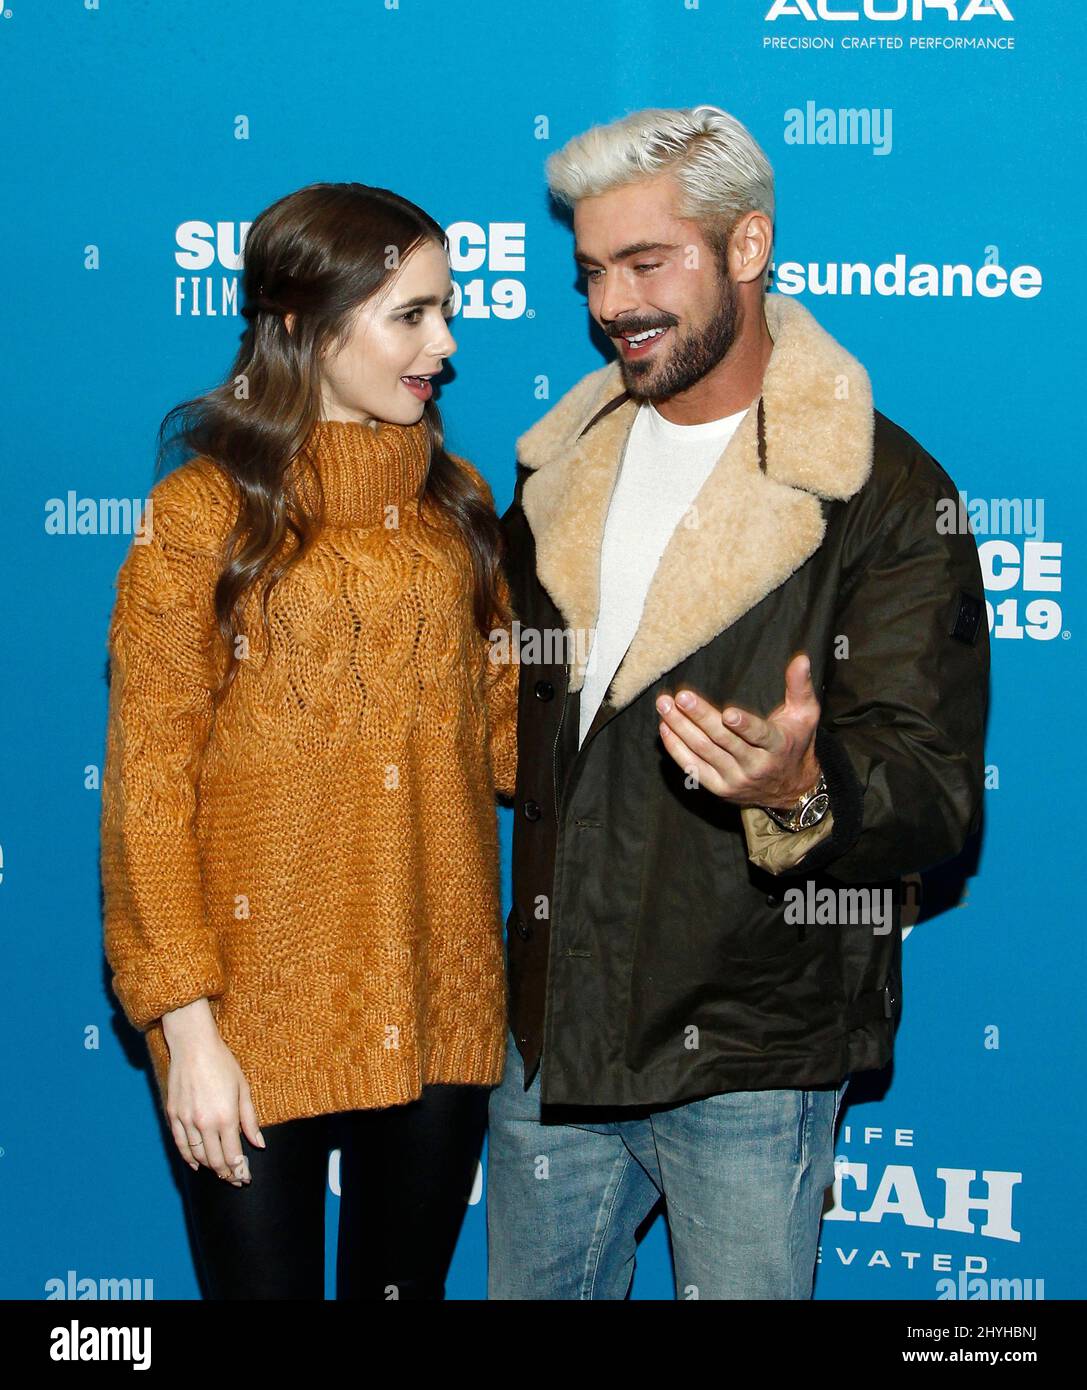 Lily Collins and Zac Efron at the premiere of 'Extremely Wicked, Shockingly Evil And Vile' during the 2019 Sundance Film Festival held at the Eccles Theatre on January 26, 2019 in Park City, UT. Stock Photo